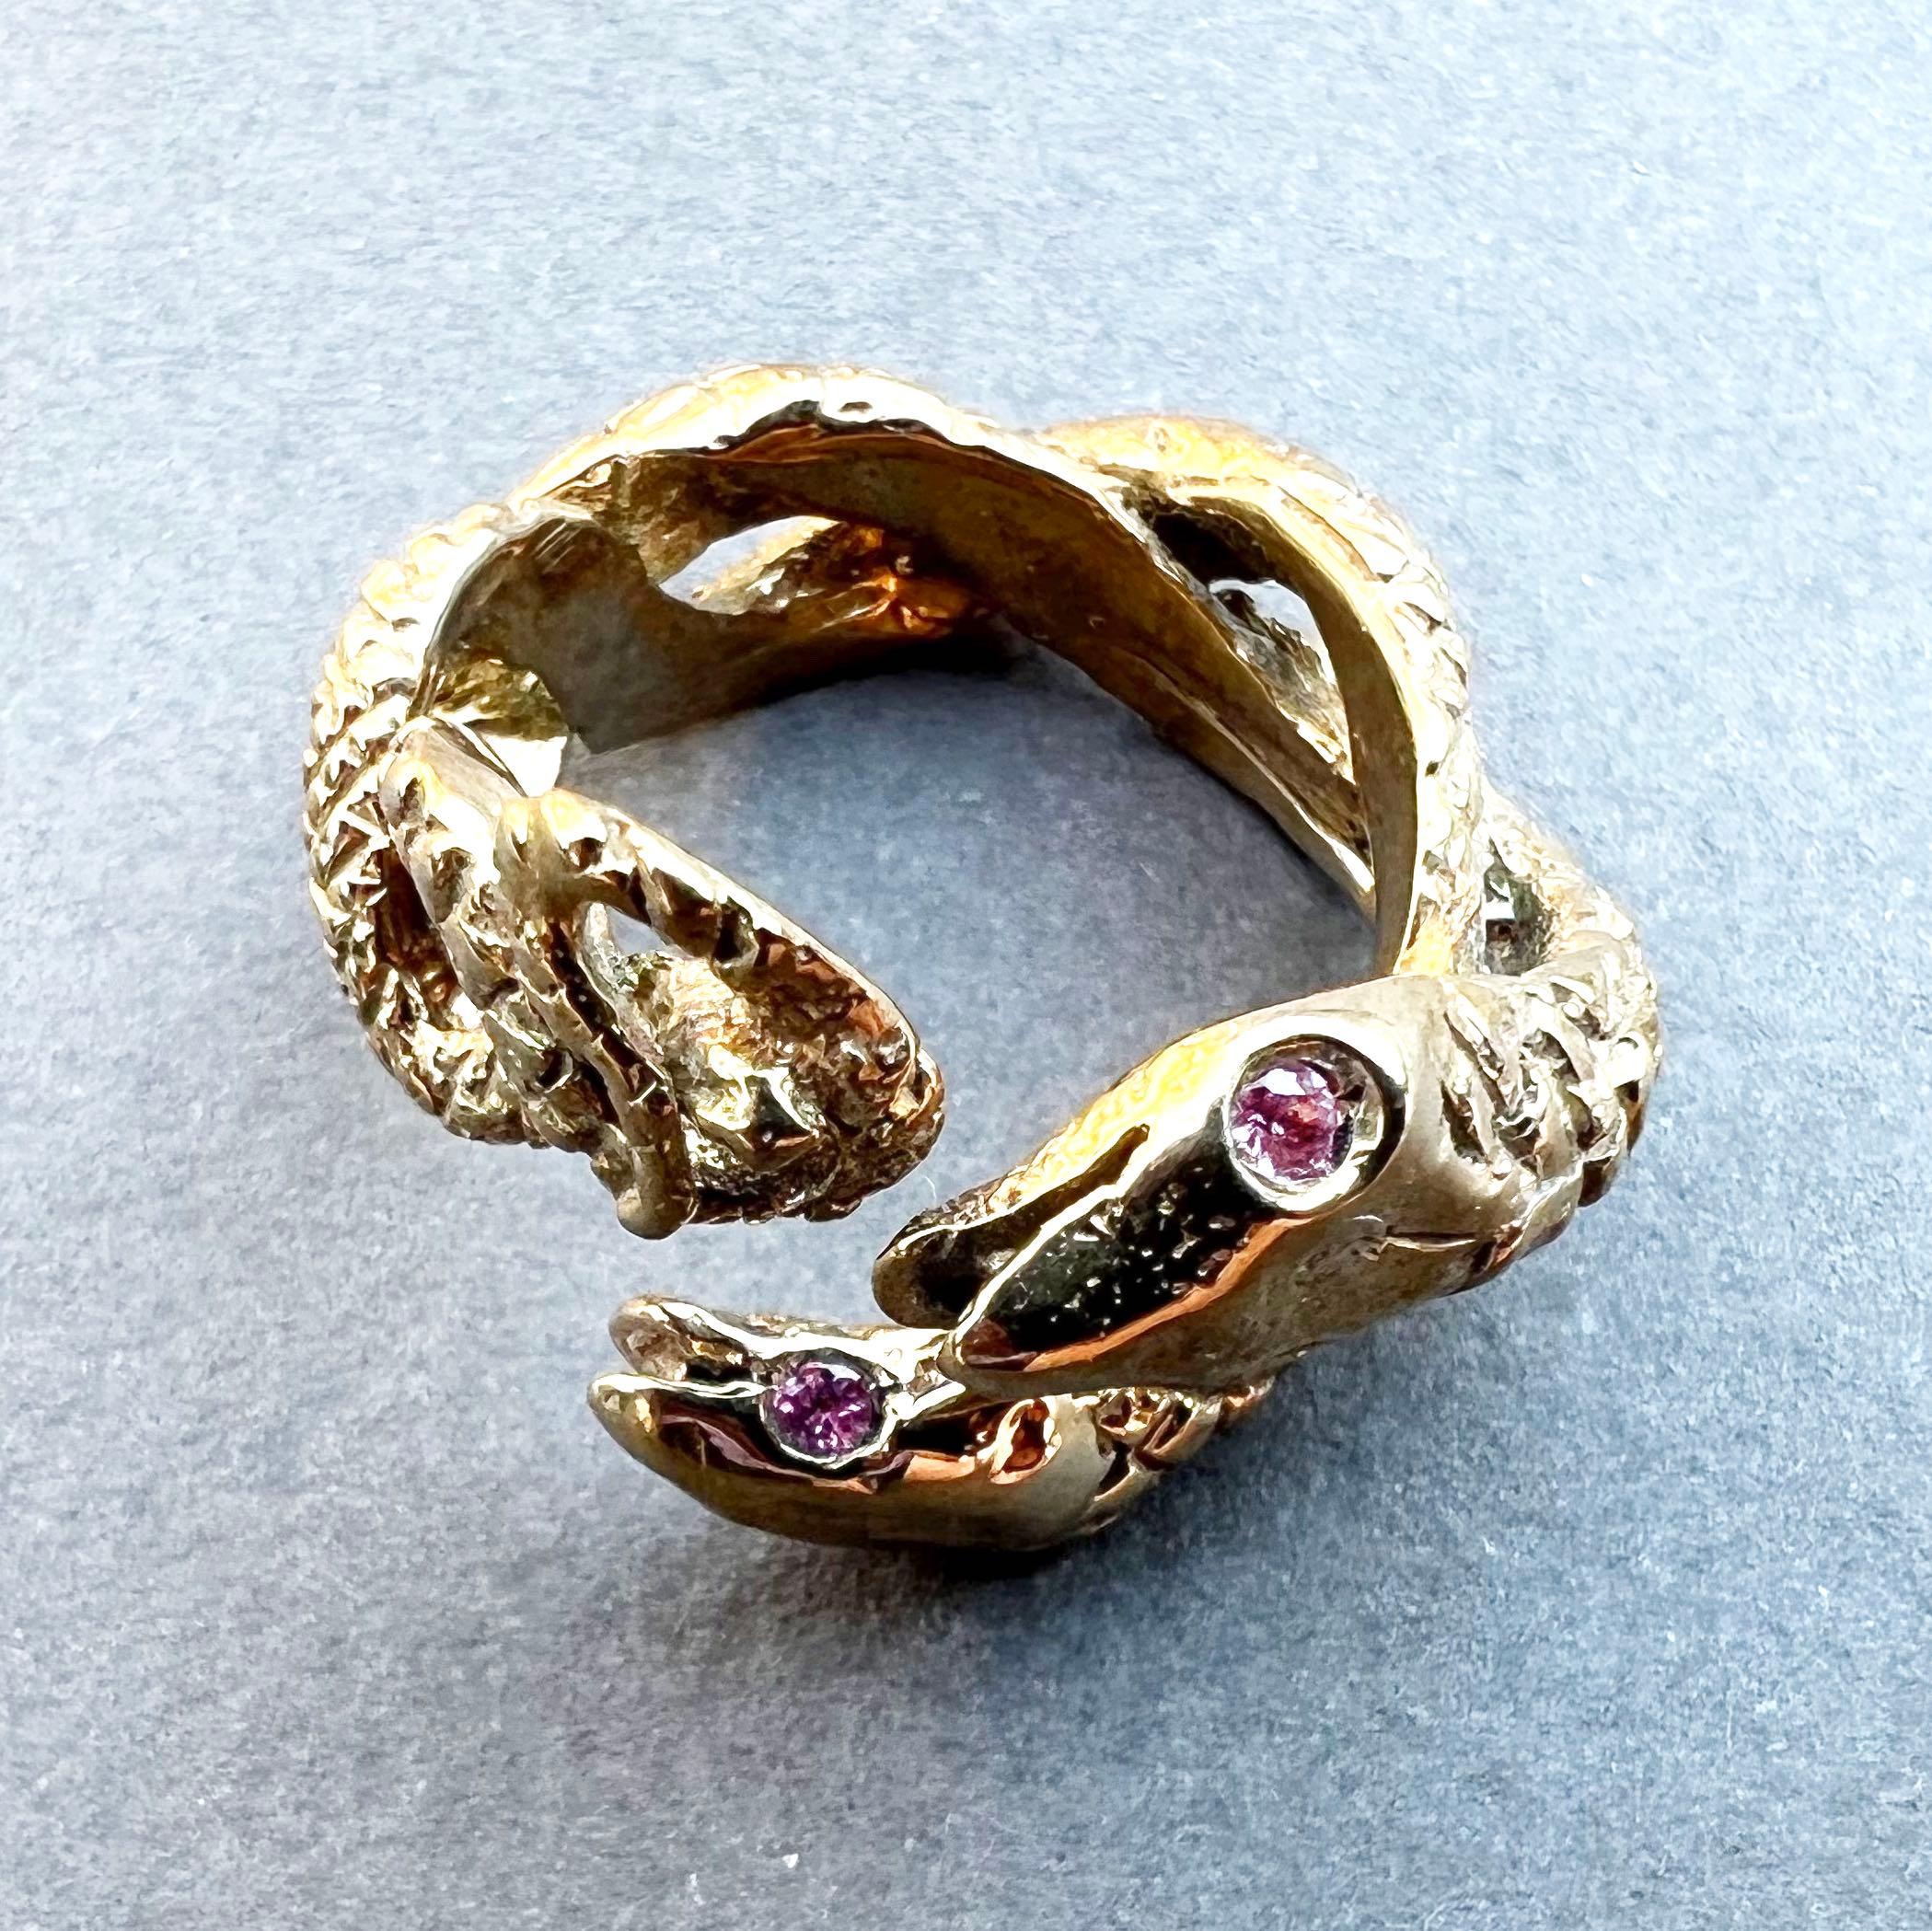 Animal jewelry Pink Sapphire Snake Ring Bronze Cocktail Ring J Dauphin For Sale 4